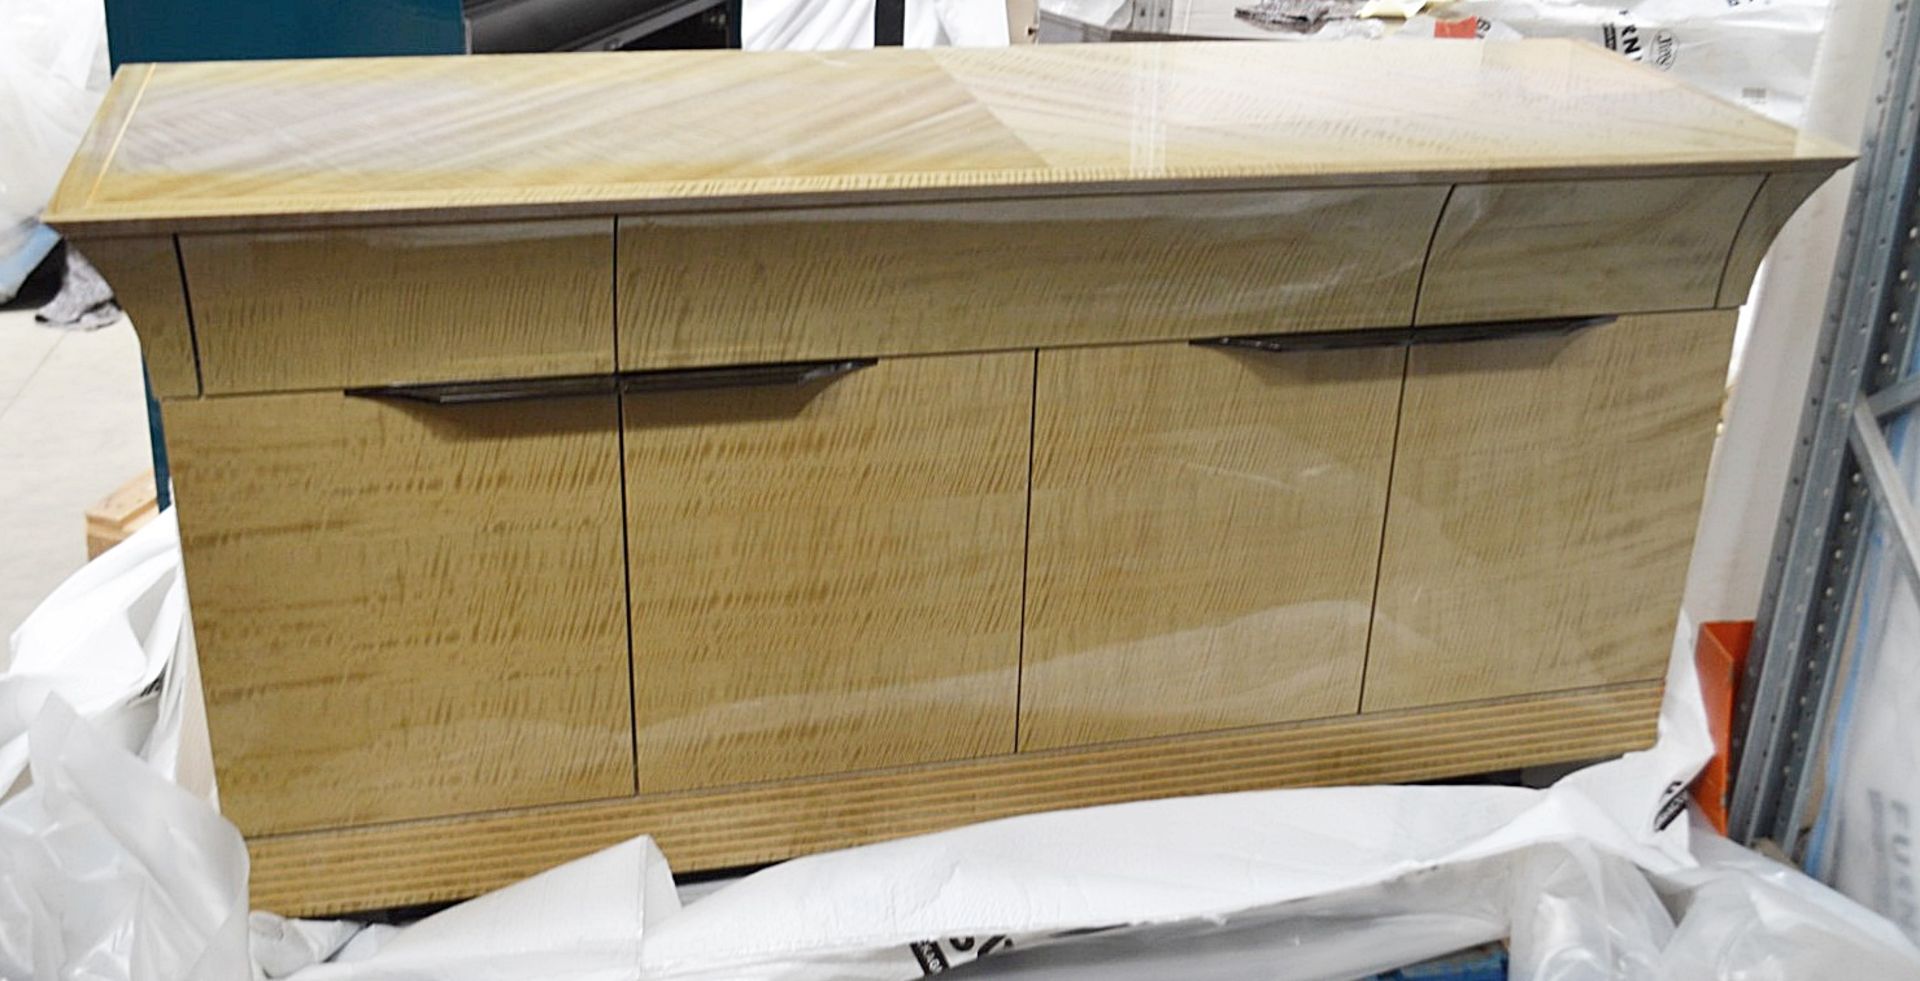 1 x GIORGIO COLLECTION 'Alchemy' Buffet / Sideboard Unit (Model: 6810/80) - Original RRP £3,495 - Image 6 of 8